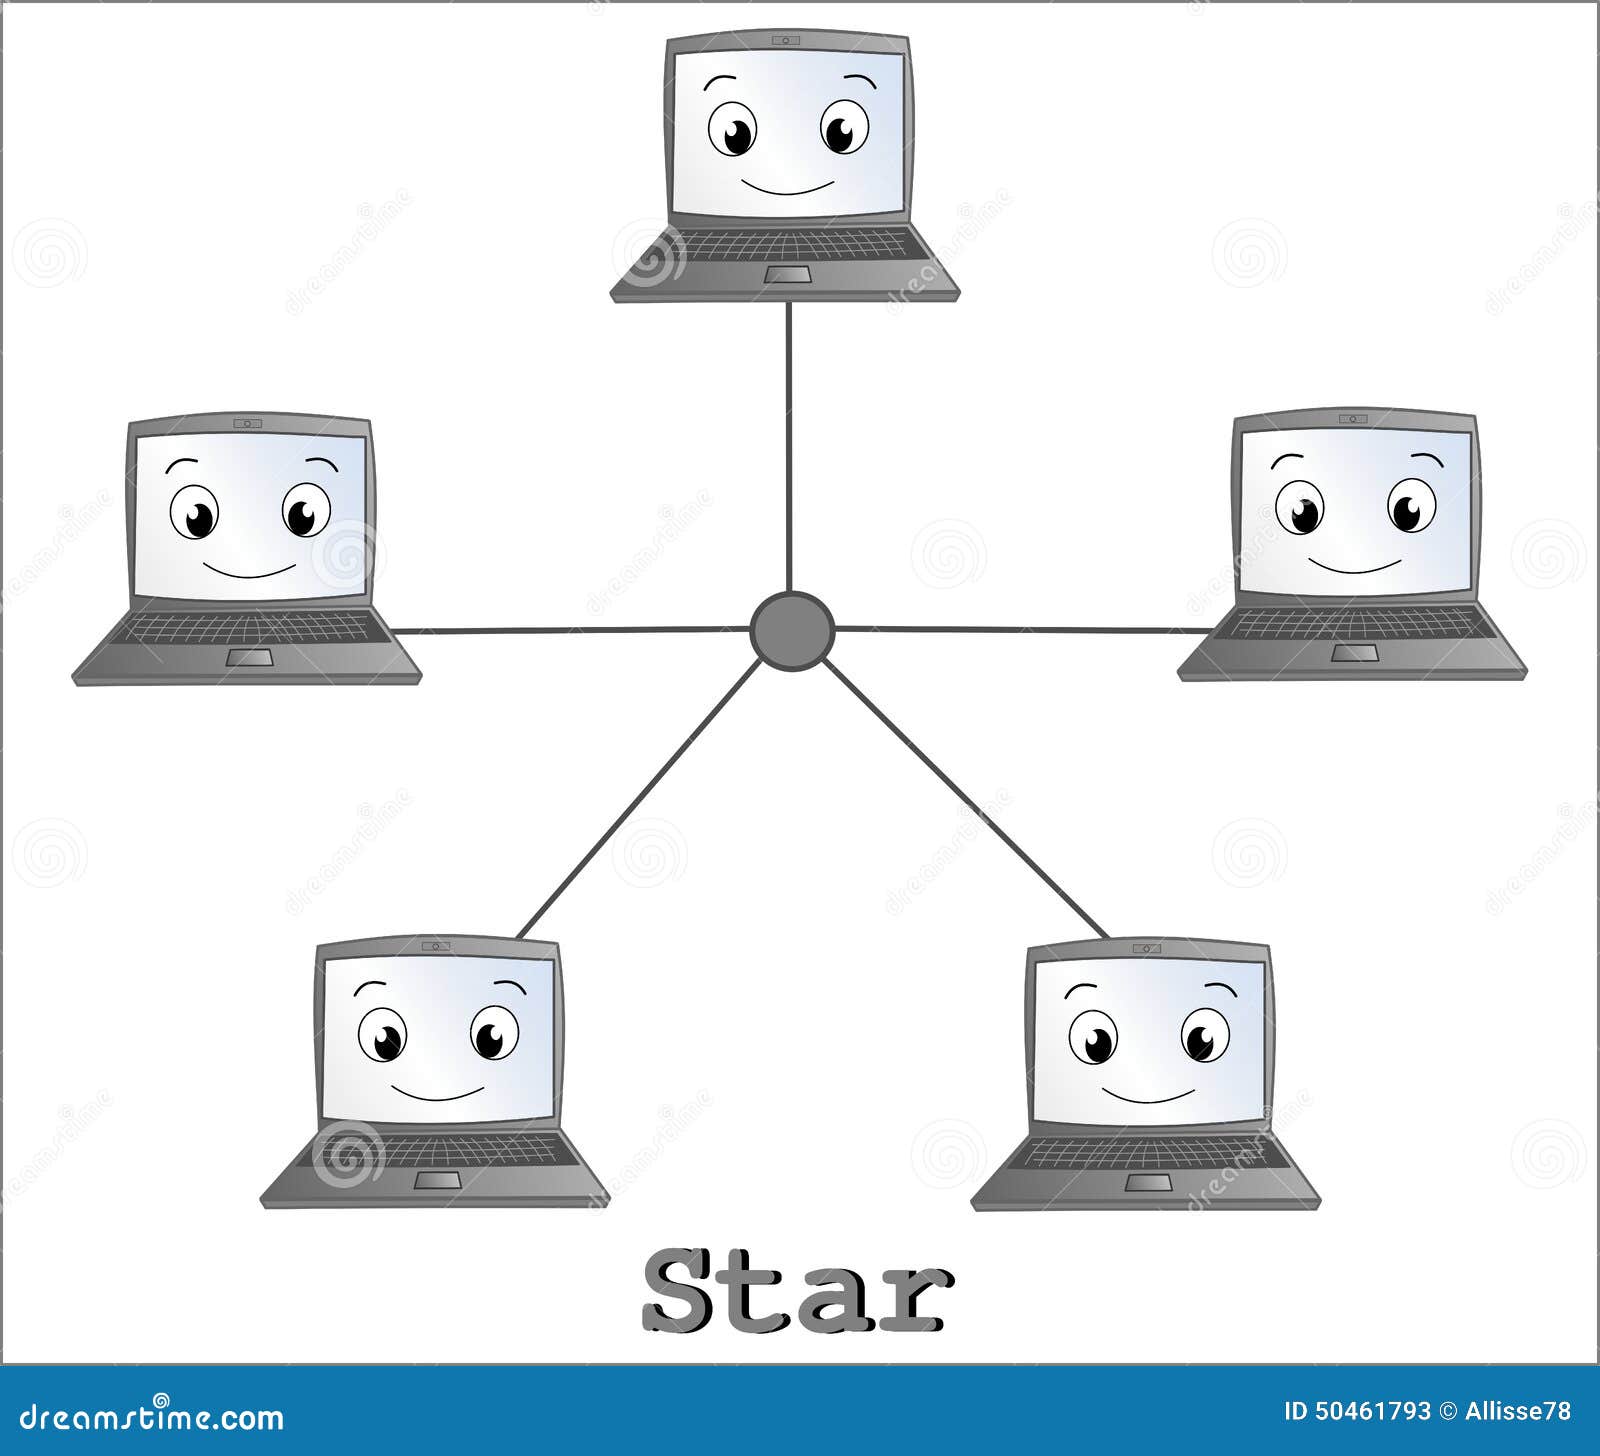 Star network topology connection with fun cartoon computer.